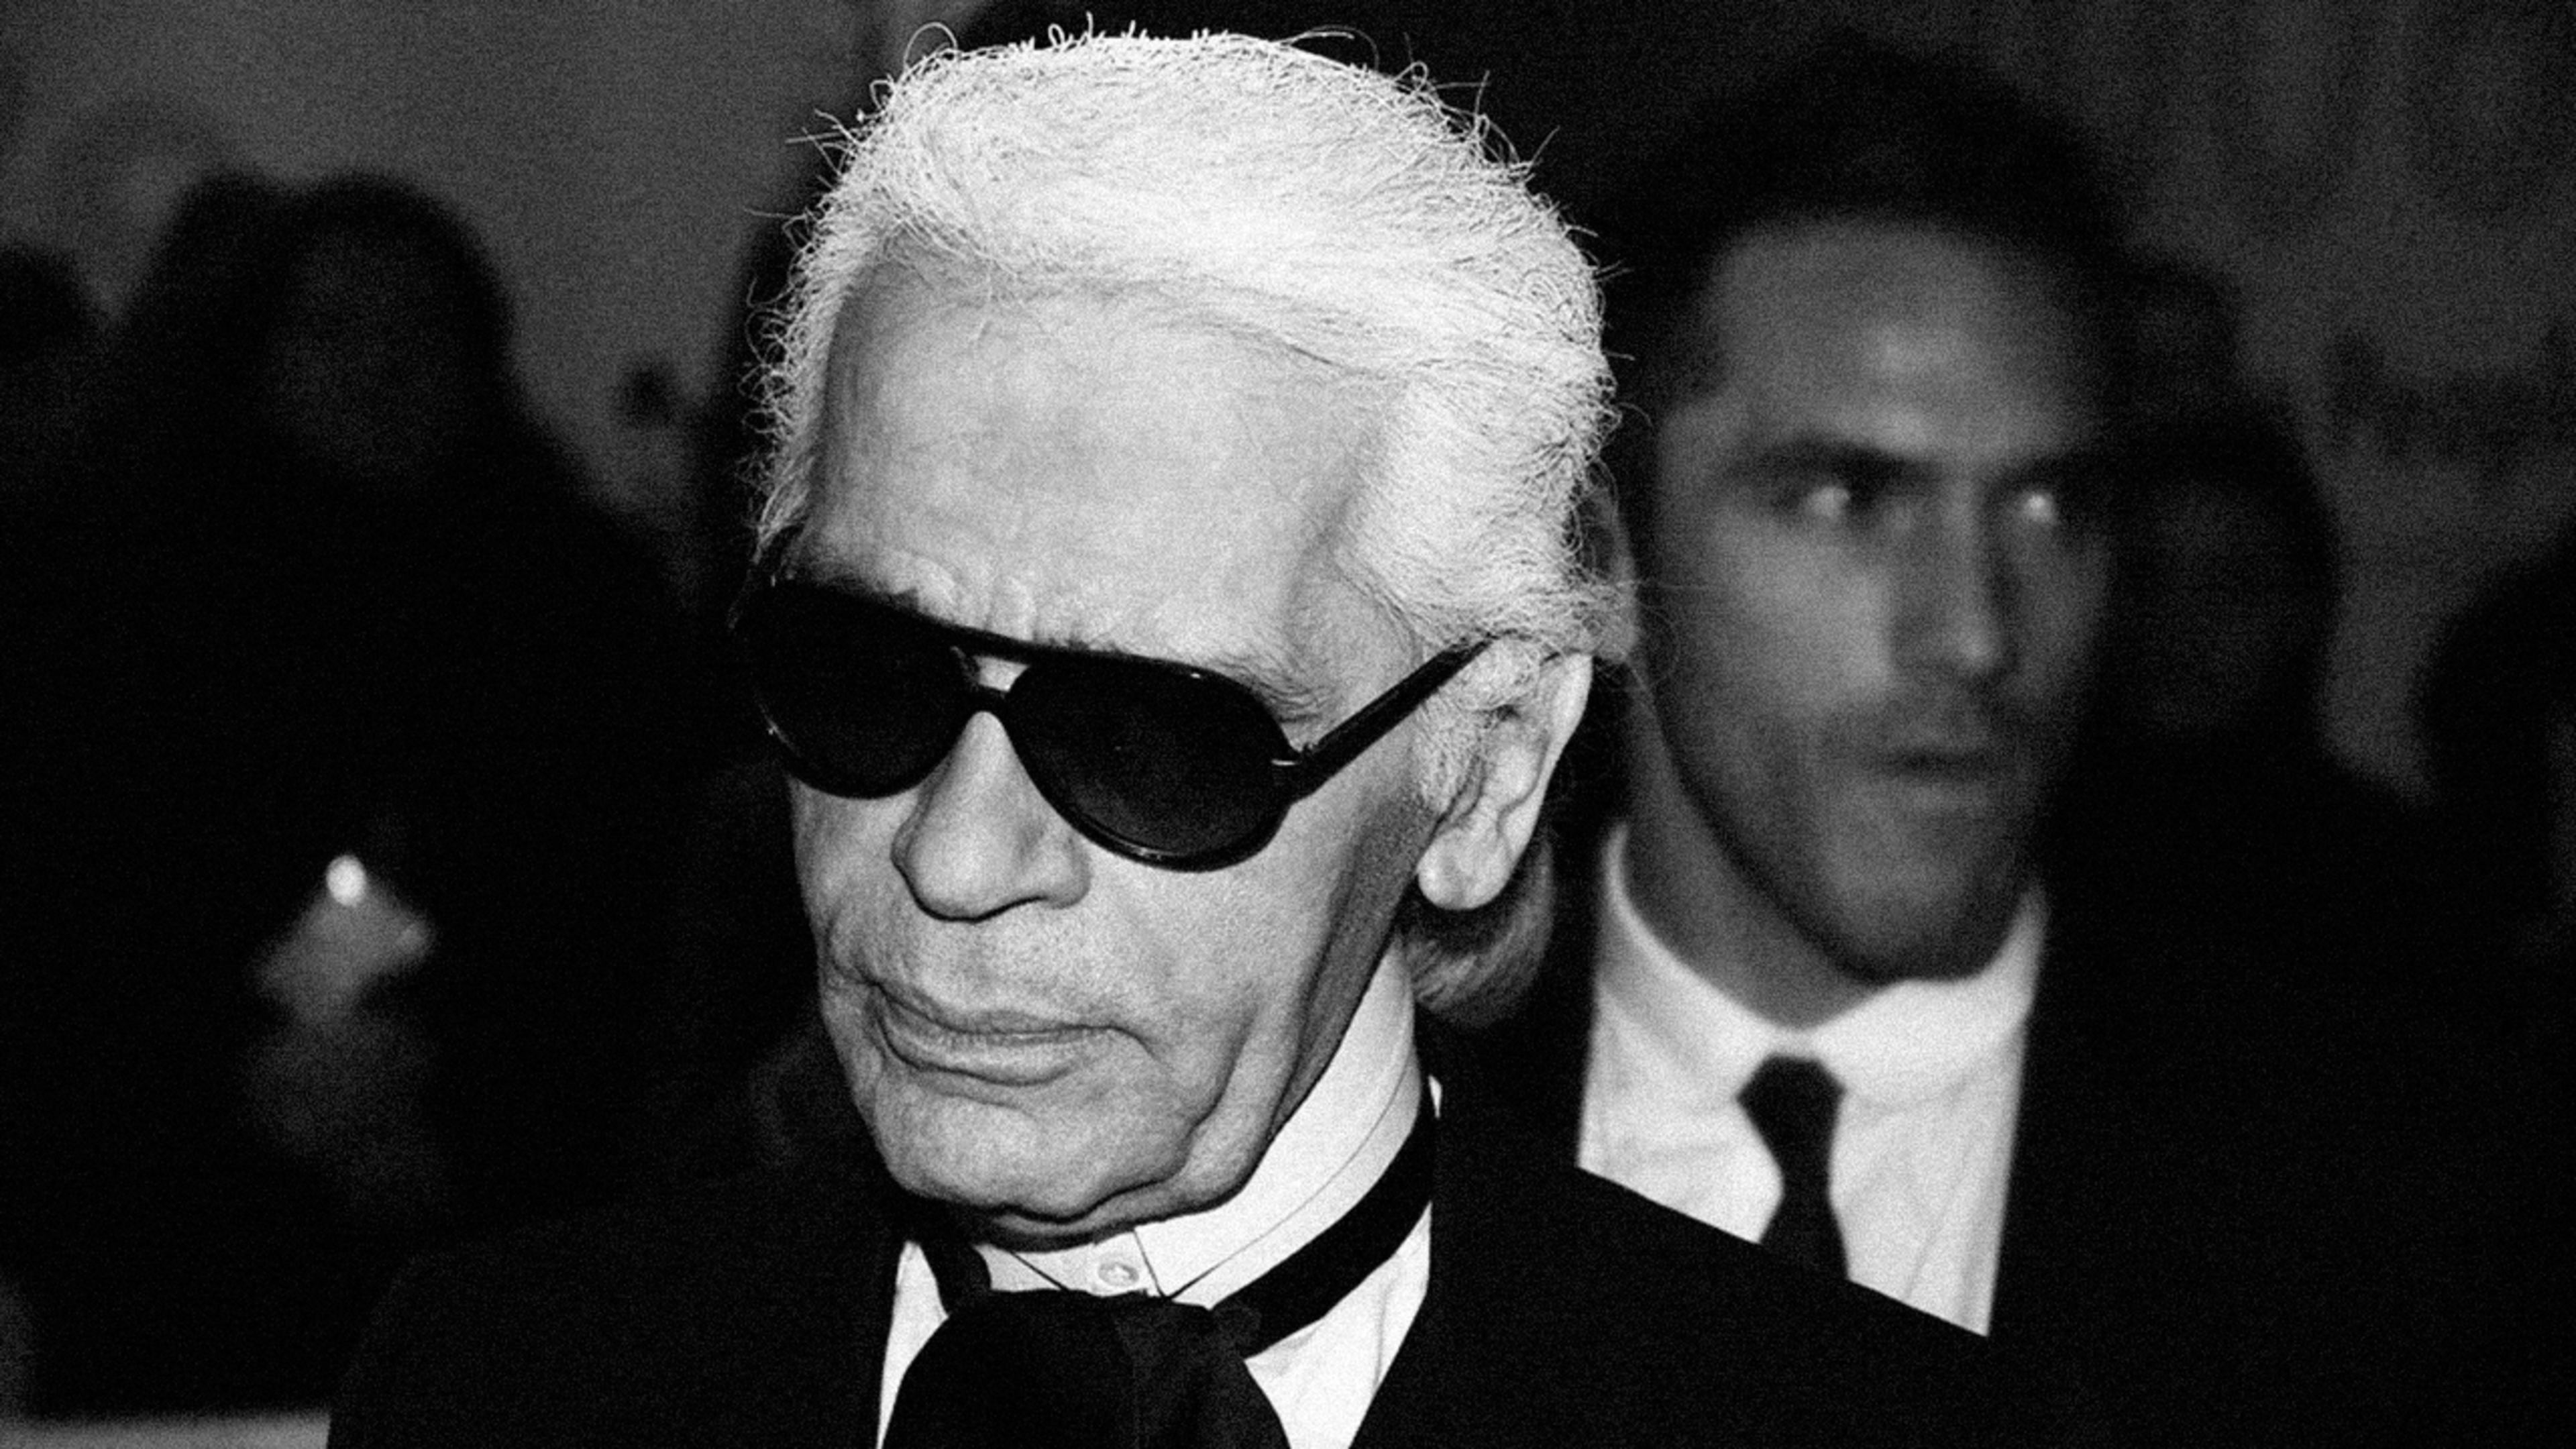 “Sweatpants are a sign of defeat”: 22 controversial Karl Lagerfeld quotes